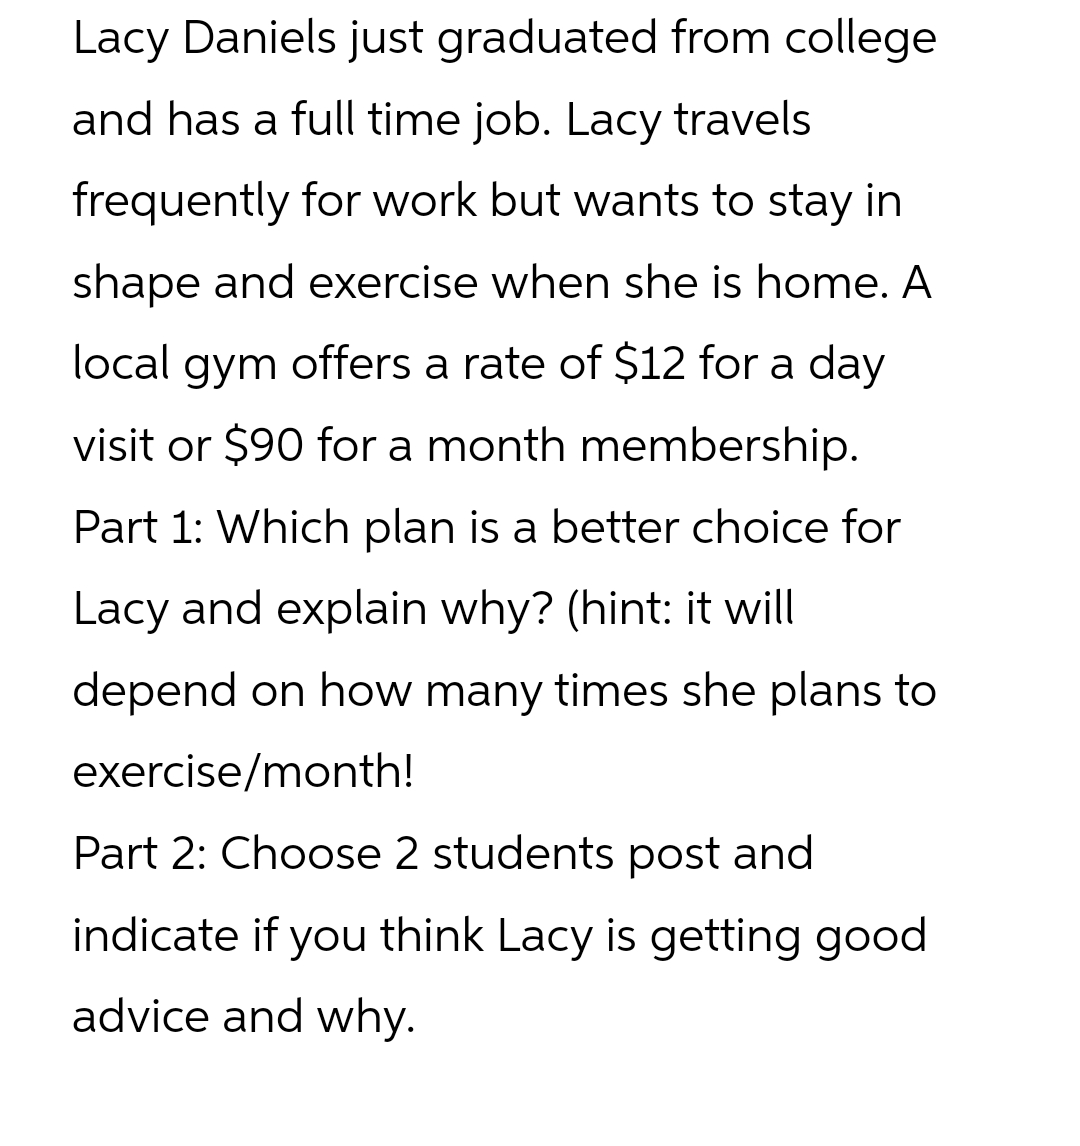 Lacy Daniels just graduated from college
and has a full time job. Lacy travels
frequently for work but wants to stay in
shape and exercise when she is home. A
local gym offers a rate of $12 for a day
visit or $90 for a month membership.
Part 1: Which plan is a better choice for
Lacy and explain why? (hint: it will
depend on how many times she plans to
exercise/month!
Part 2: Choose 2 students post and
indicate if you think Lacy is getting good
advice and why.